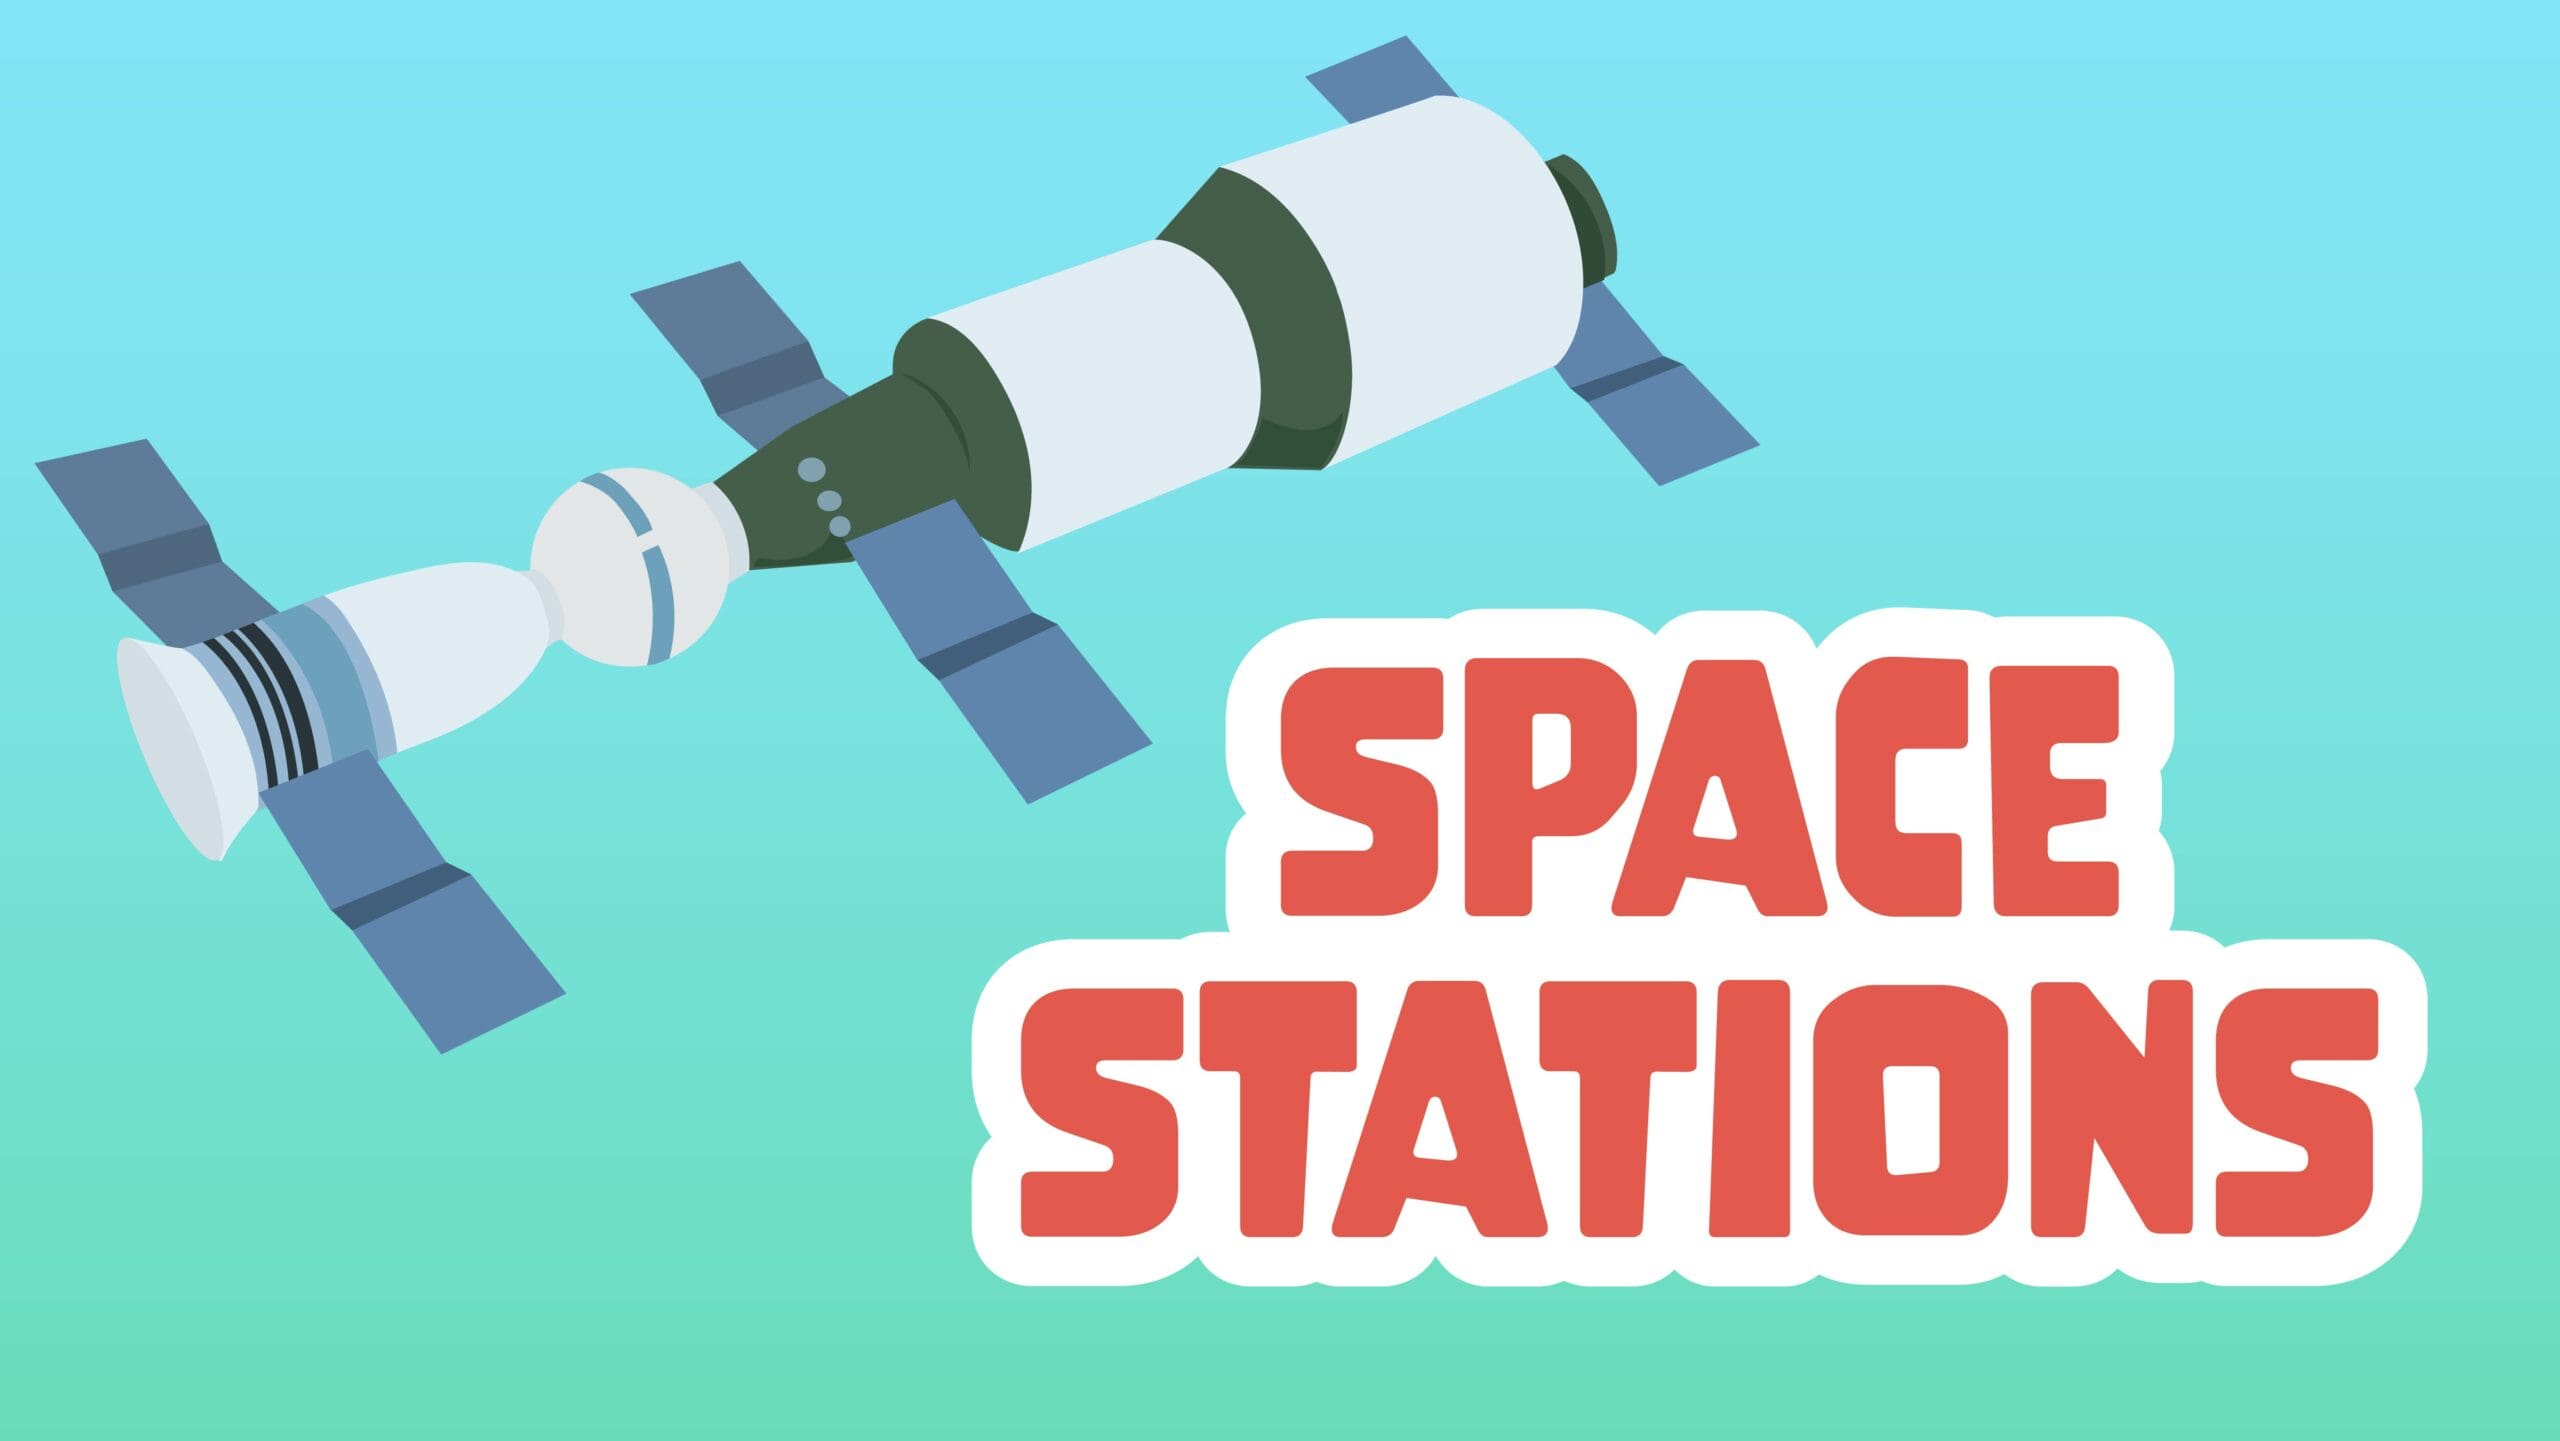 Space Stations